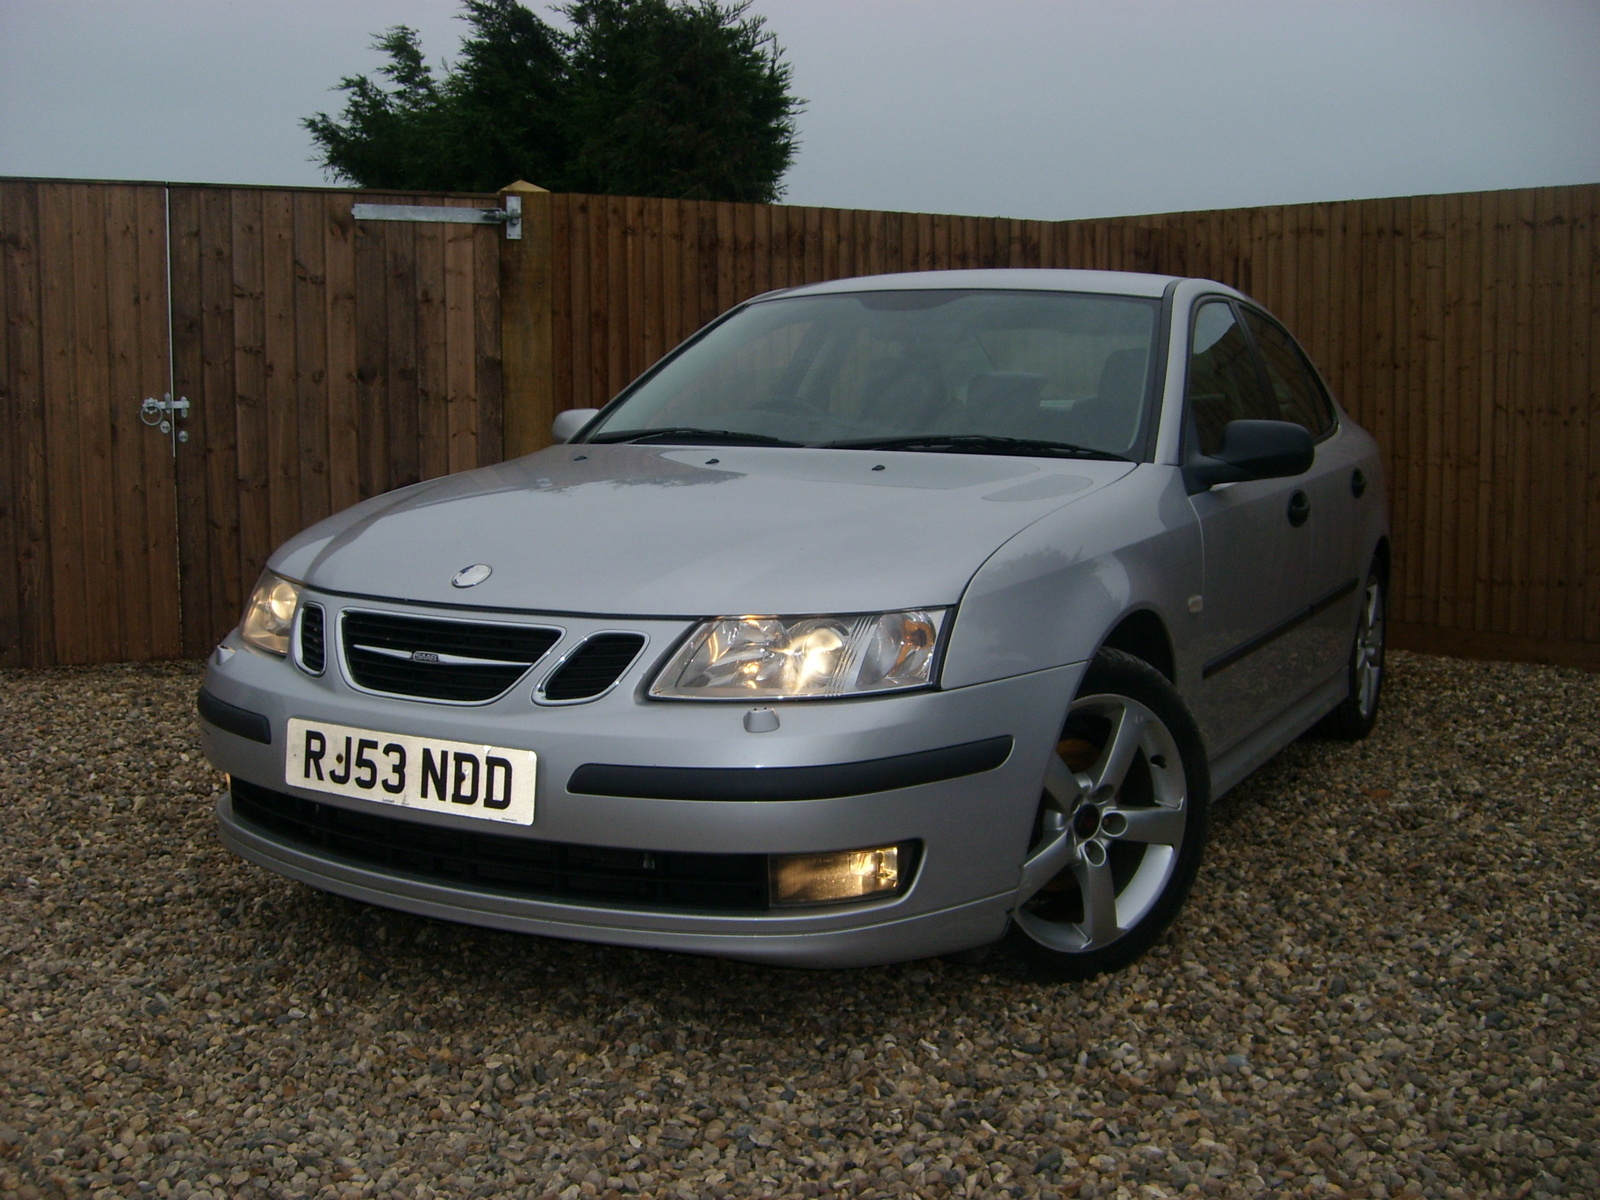 2003 Saab 9-3 Vector - Pictures - 2003 Saab 9-3 Vector picture ...